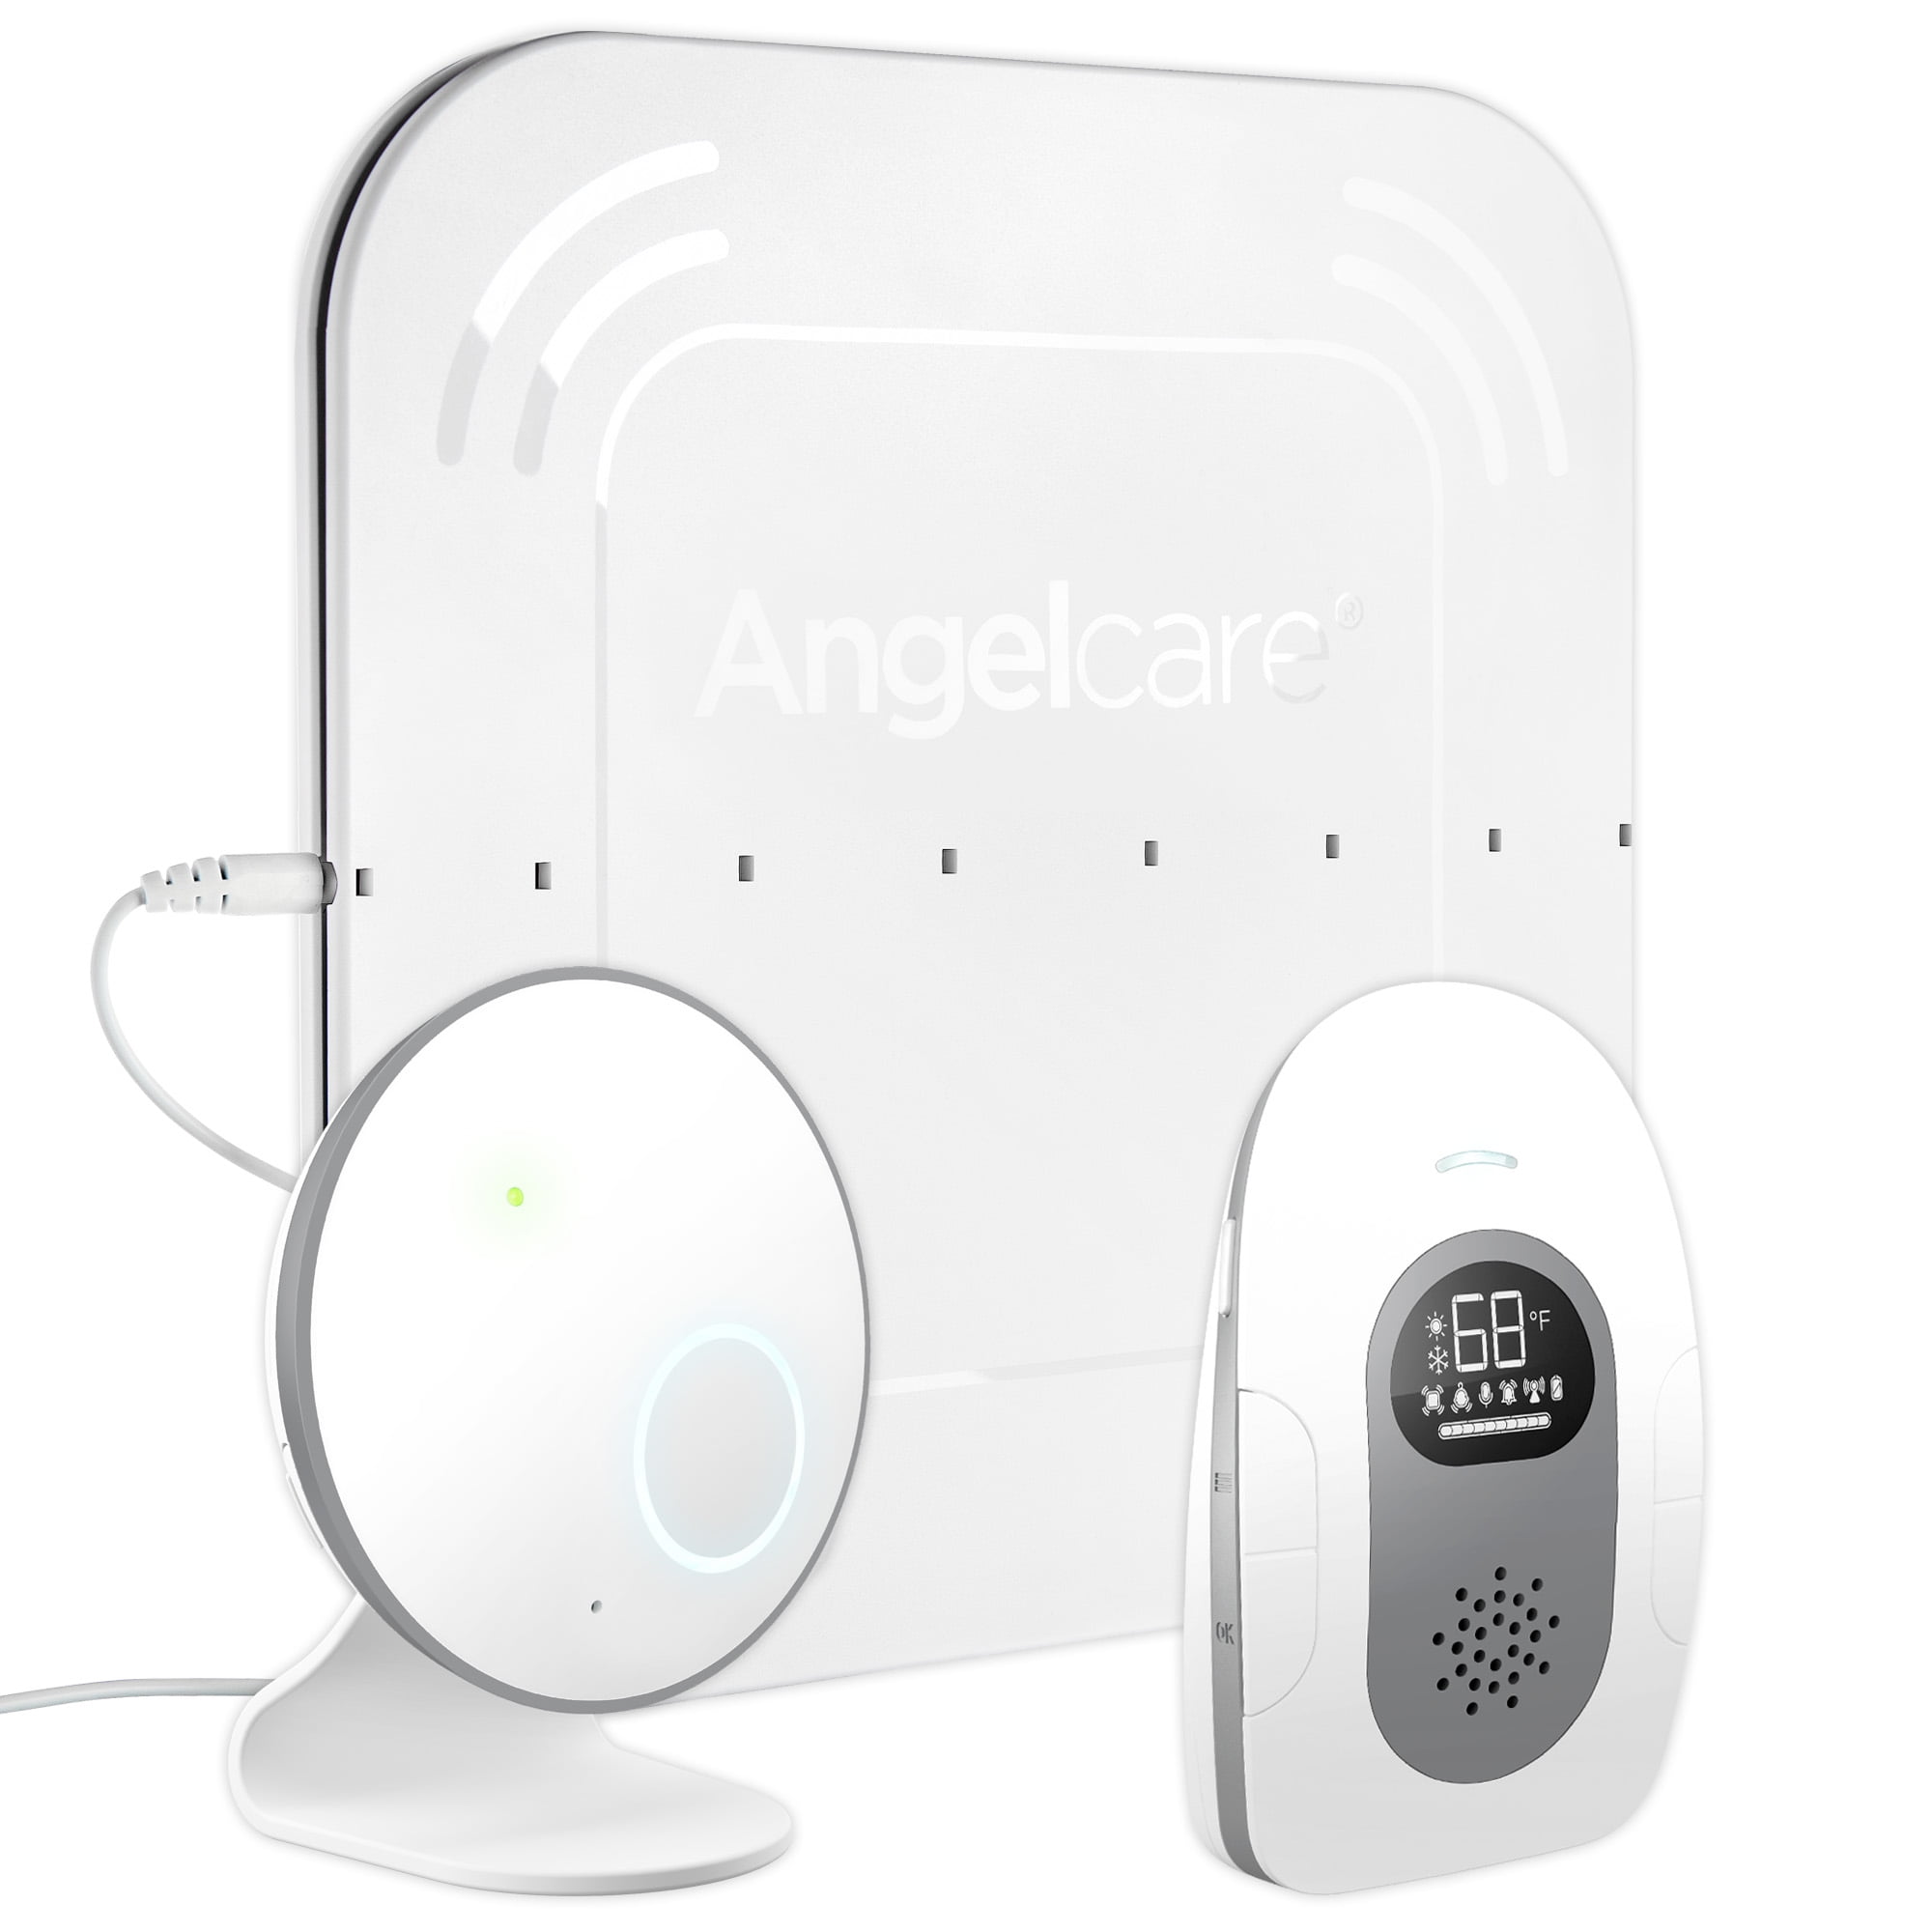 angelcare breathing monitor